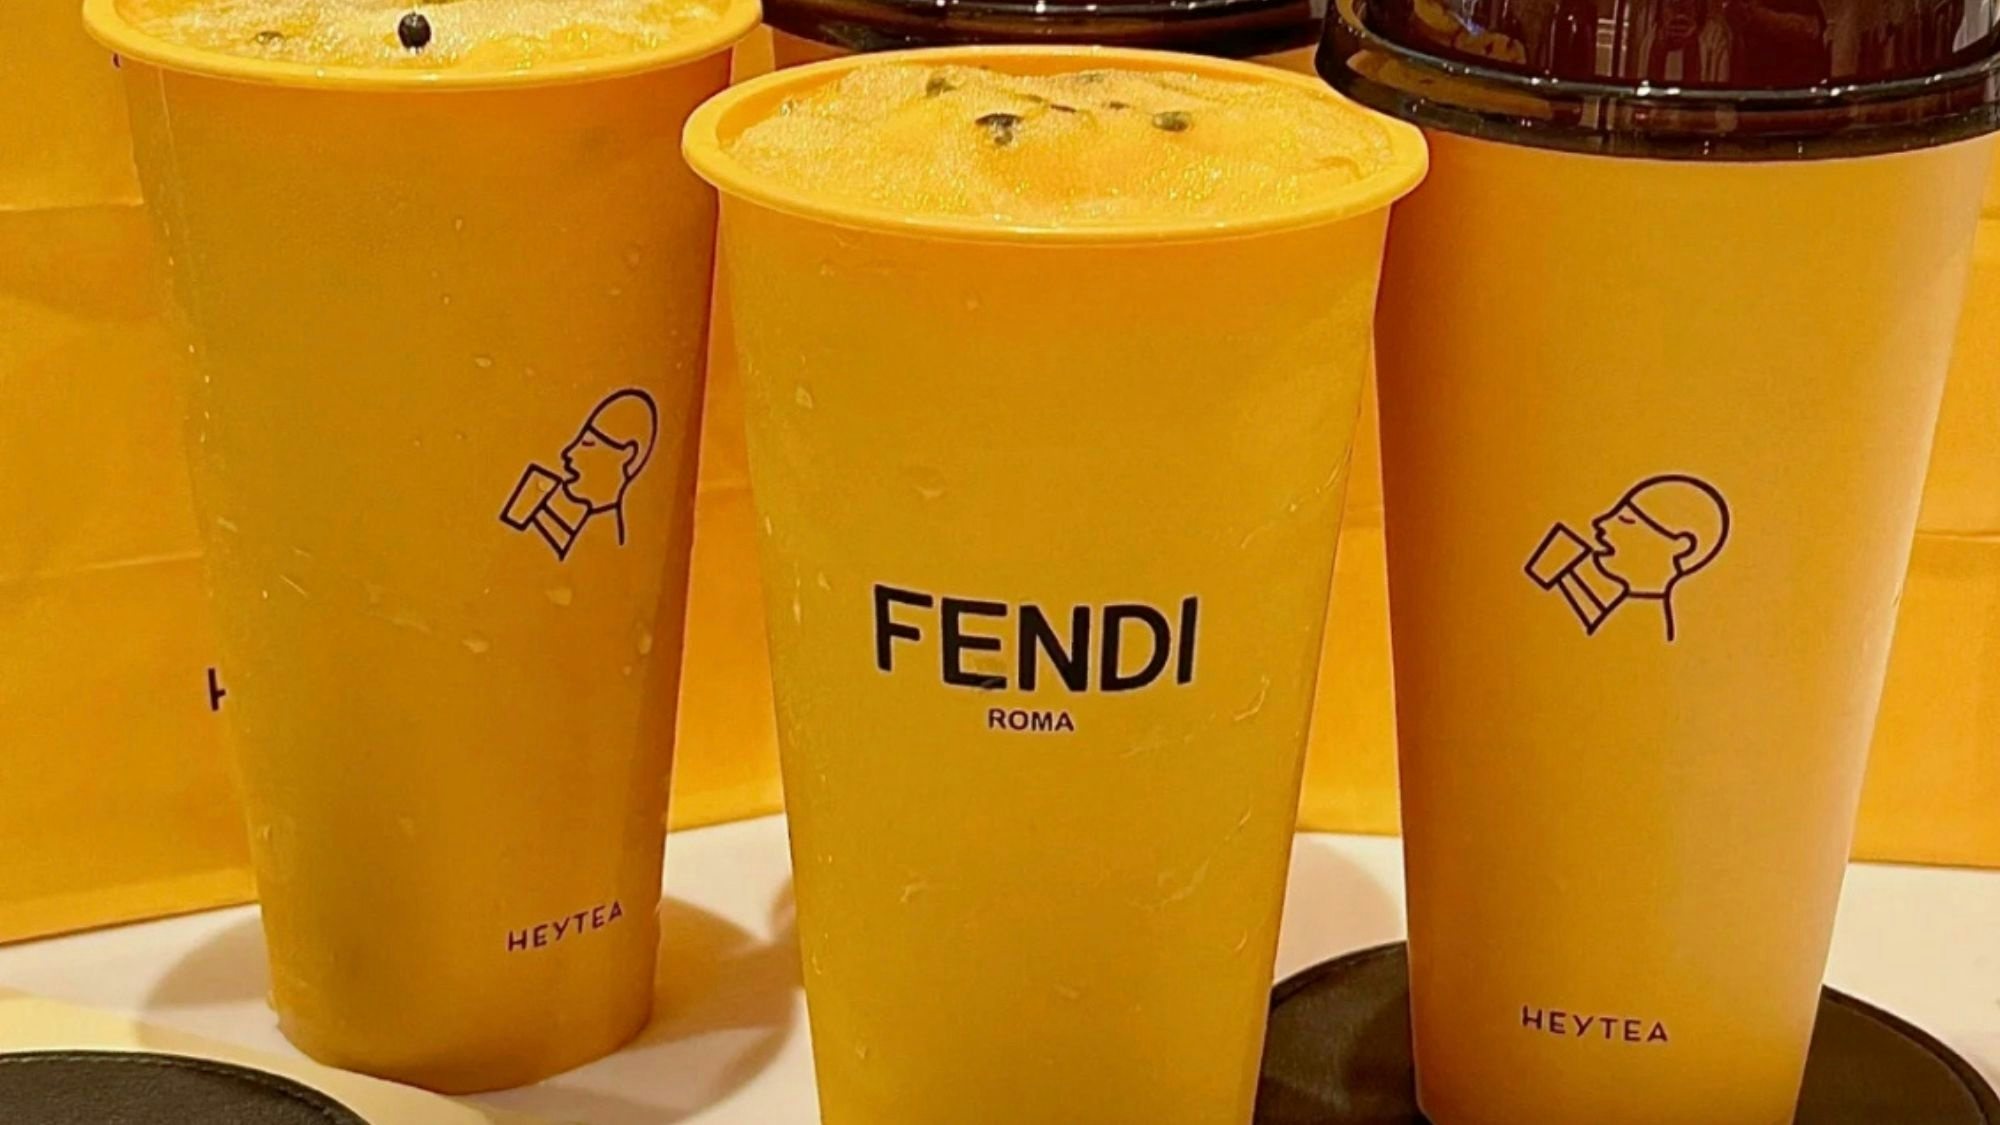 Fendi is connecting with Chinese Gen Z through their favorite drinks brand. Photo: Xiaohongshu